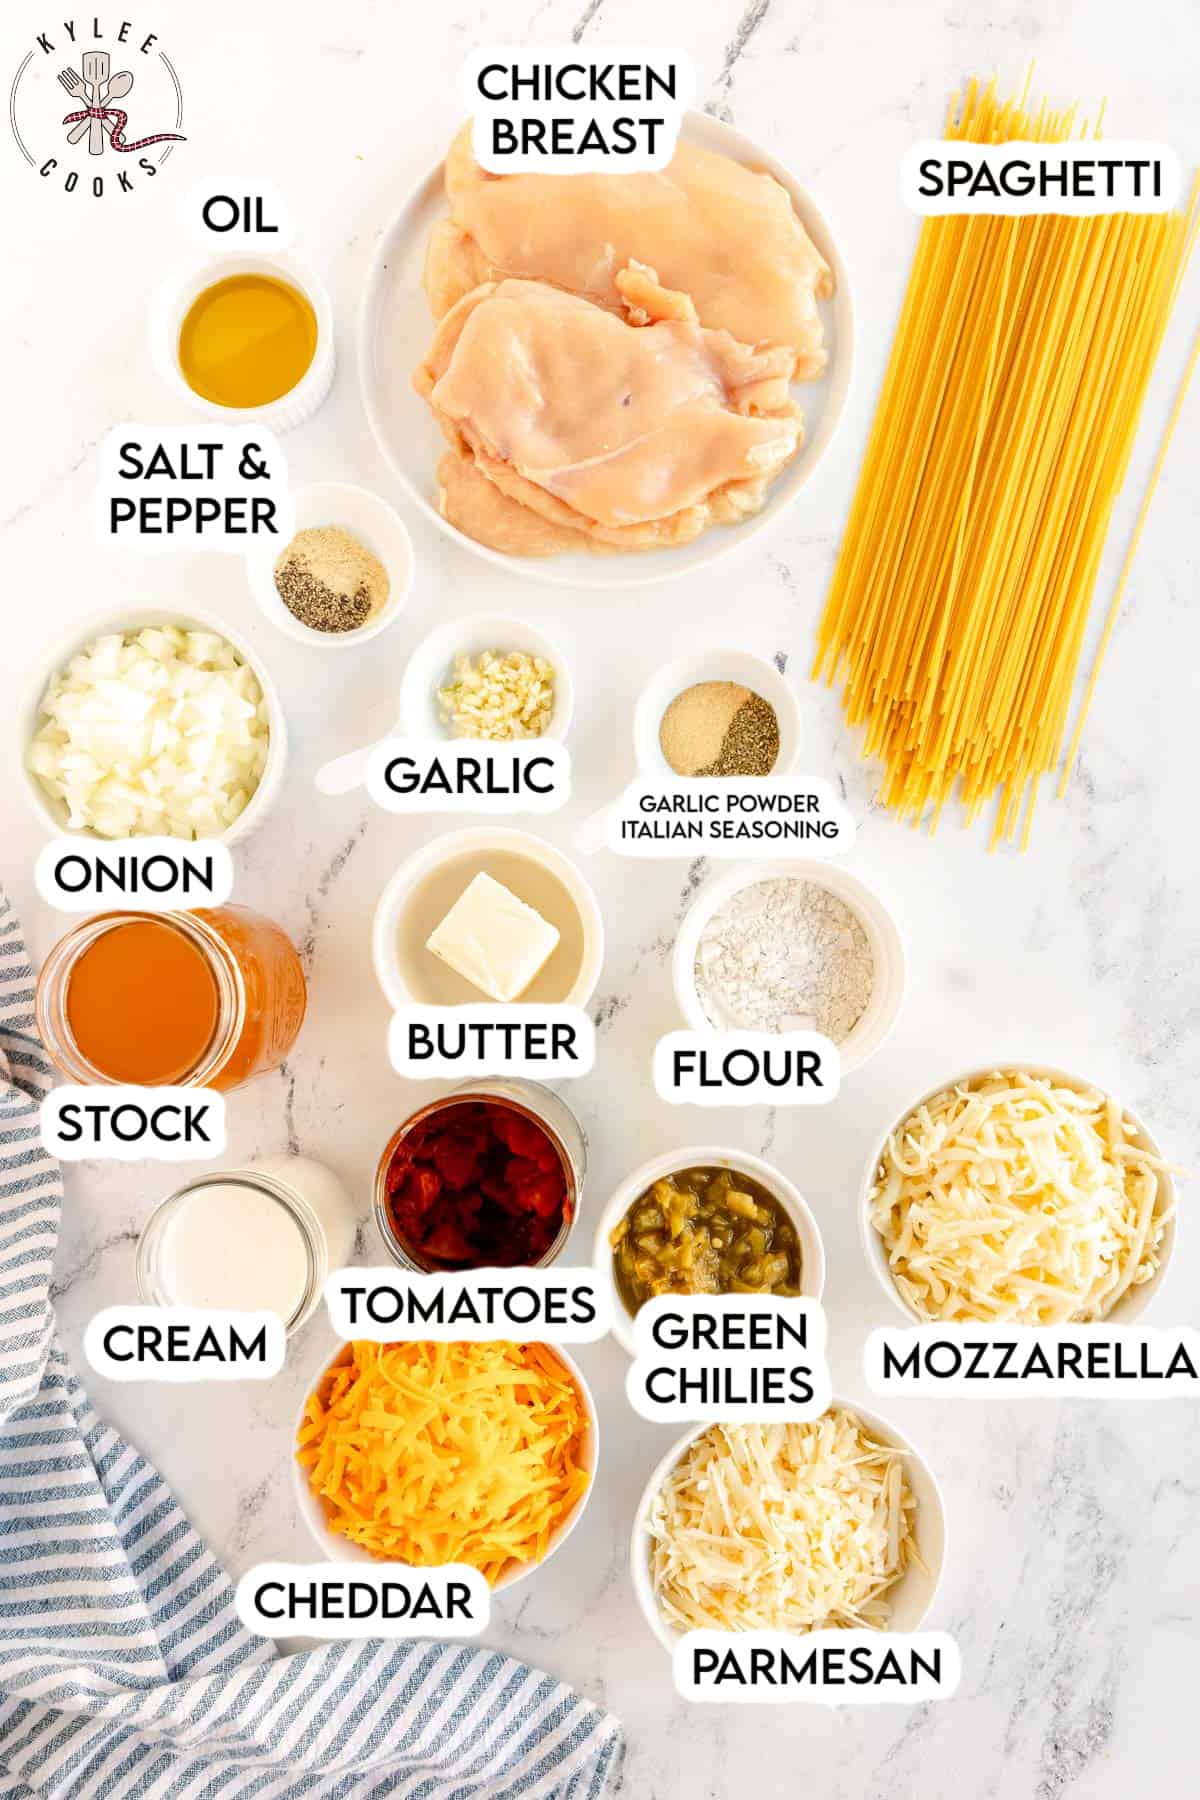 ingredients to make chicken spaghetti laid out and labeled.